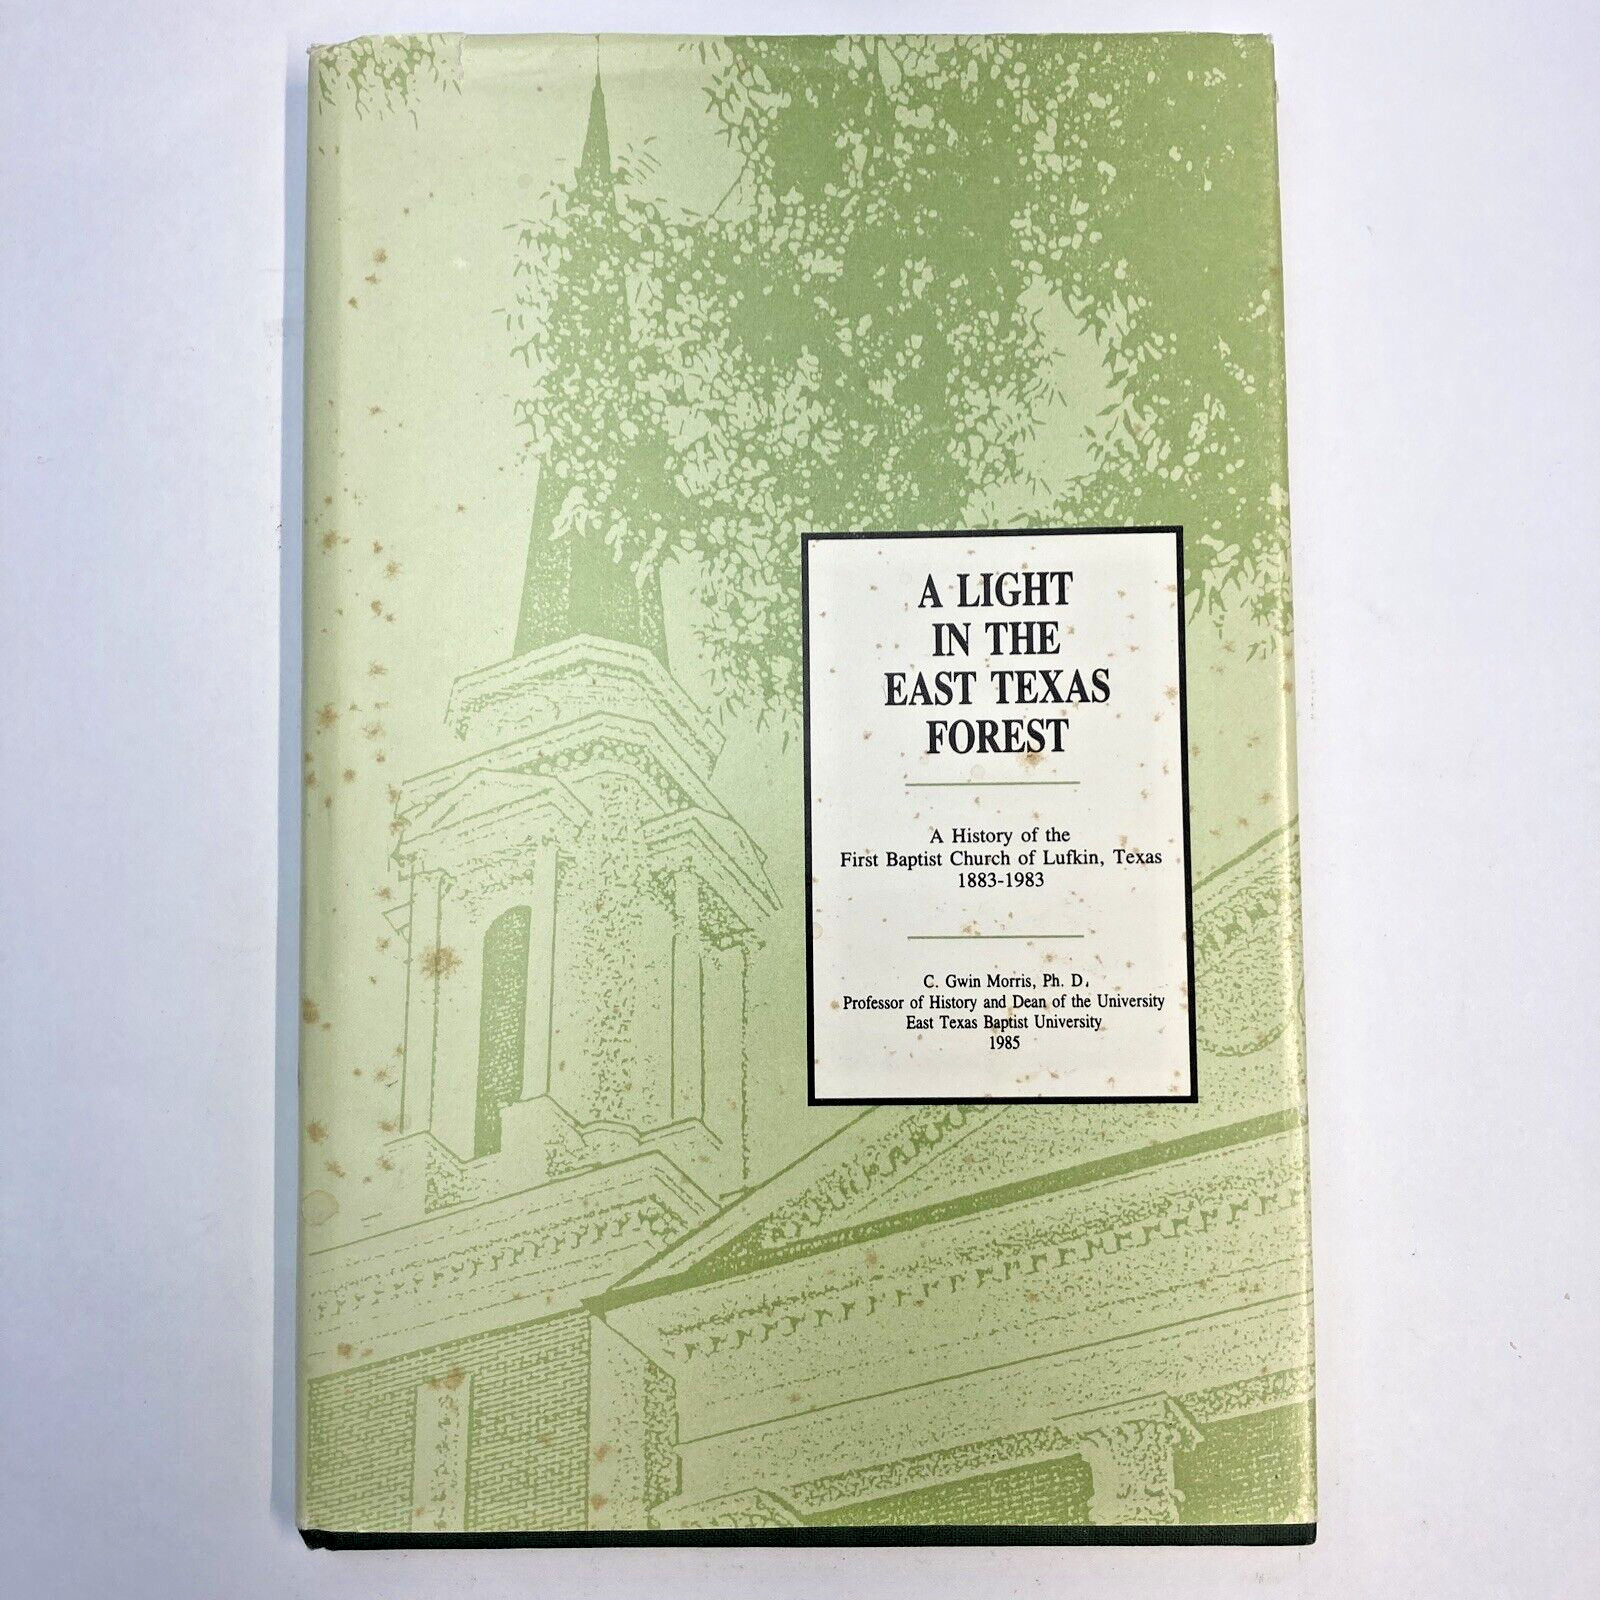 Lufkin Texas First Baptist Church History A Light in the East Texas Forest 1985